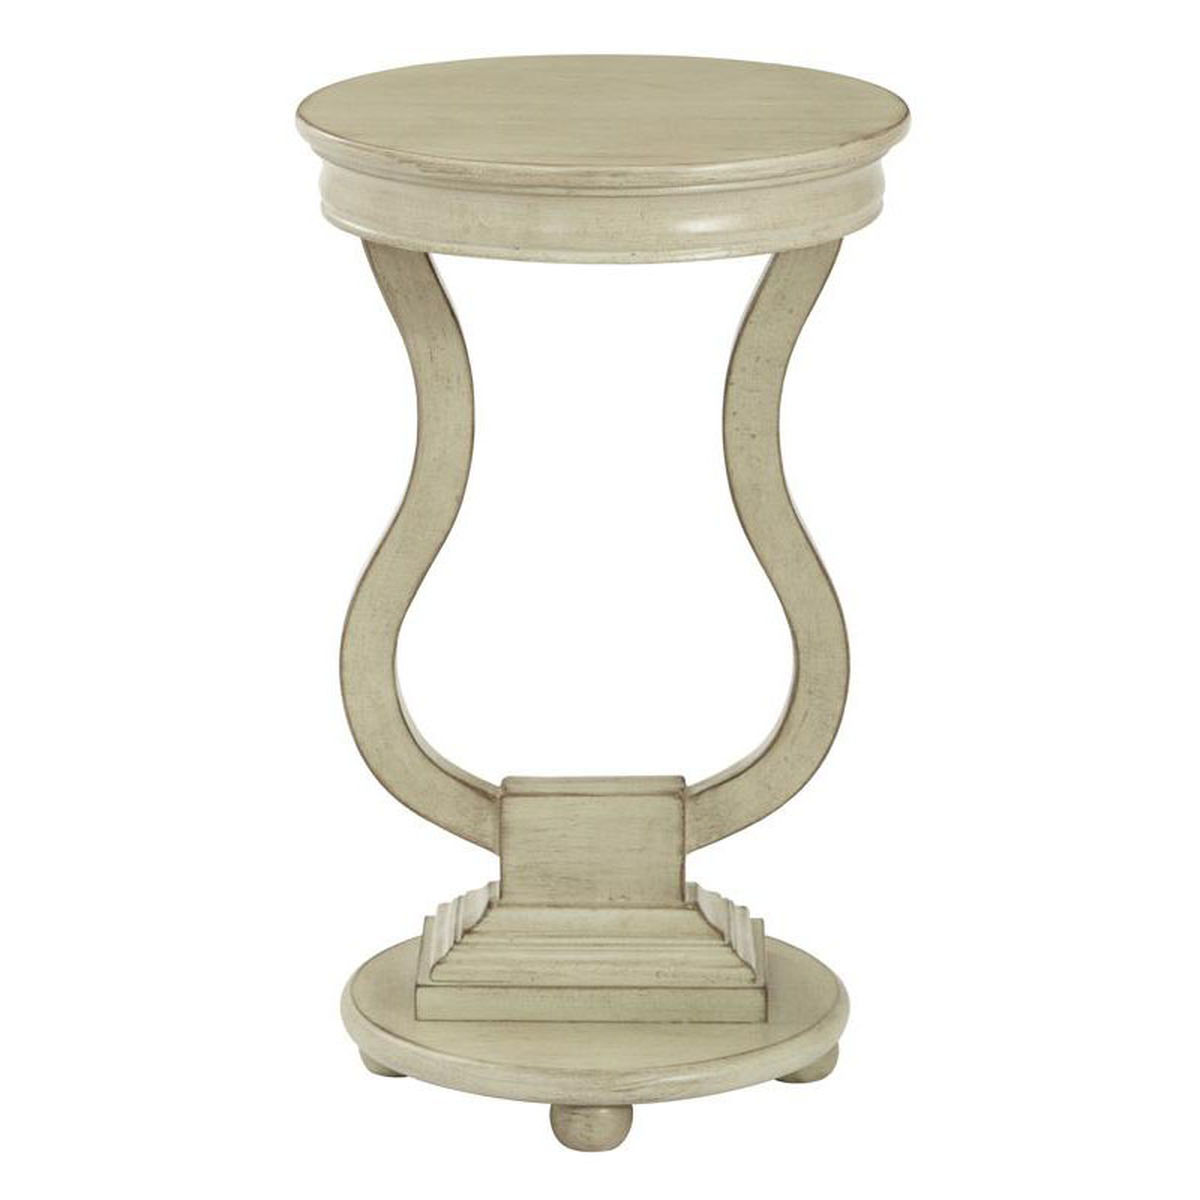 chase round wood accent table bizchair office star products our osp designs antique celadon now natural garden furniture ethan allen thai living room lamp shades patio covers